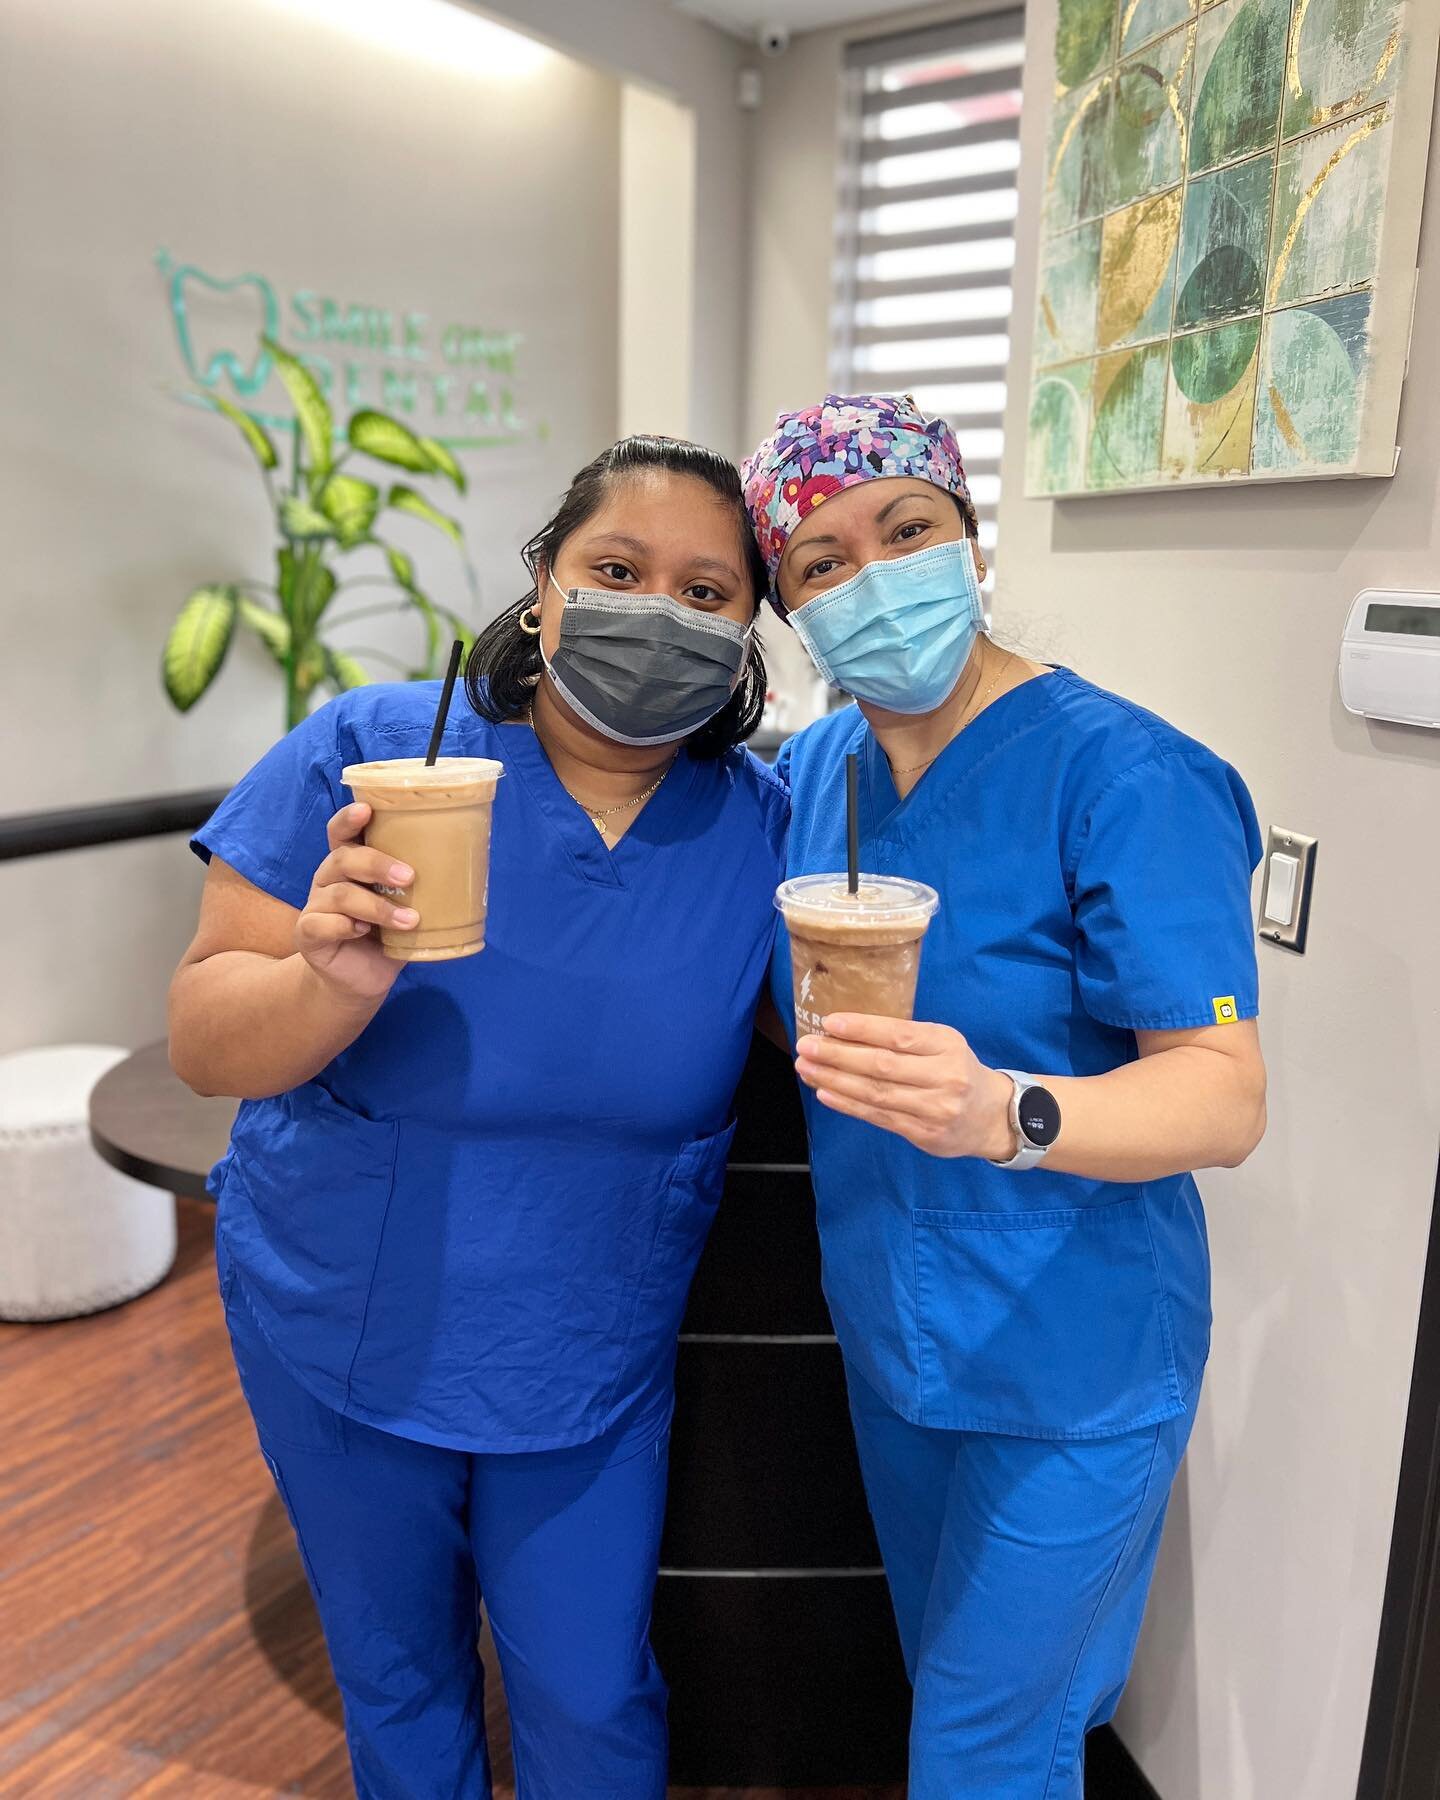 We had a lovely dental assistants week, and doctor was also spoiled for national dentist day. Everyone feels the love around here 💚🥰💙
.
.
.
#smileonedental #dentaloffice #dental #dentalassistant #dentalassistantweek #dentalcare #dentalteam #dreamt